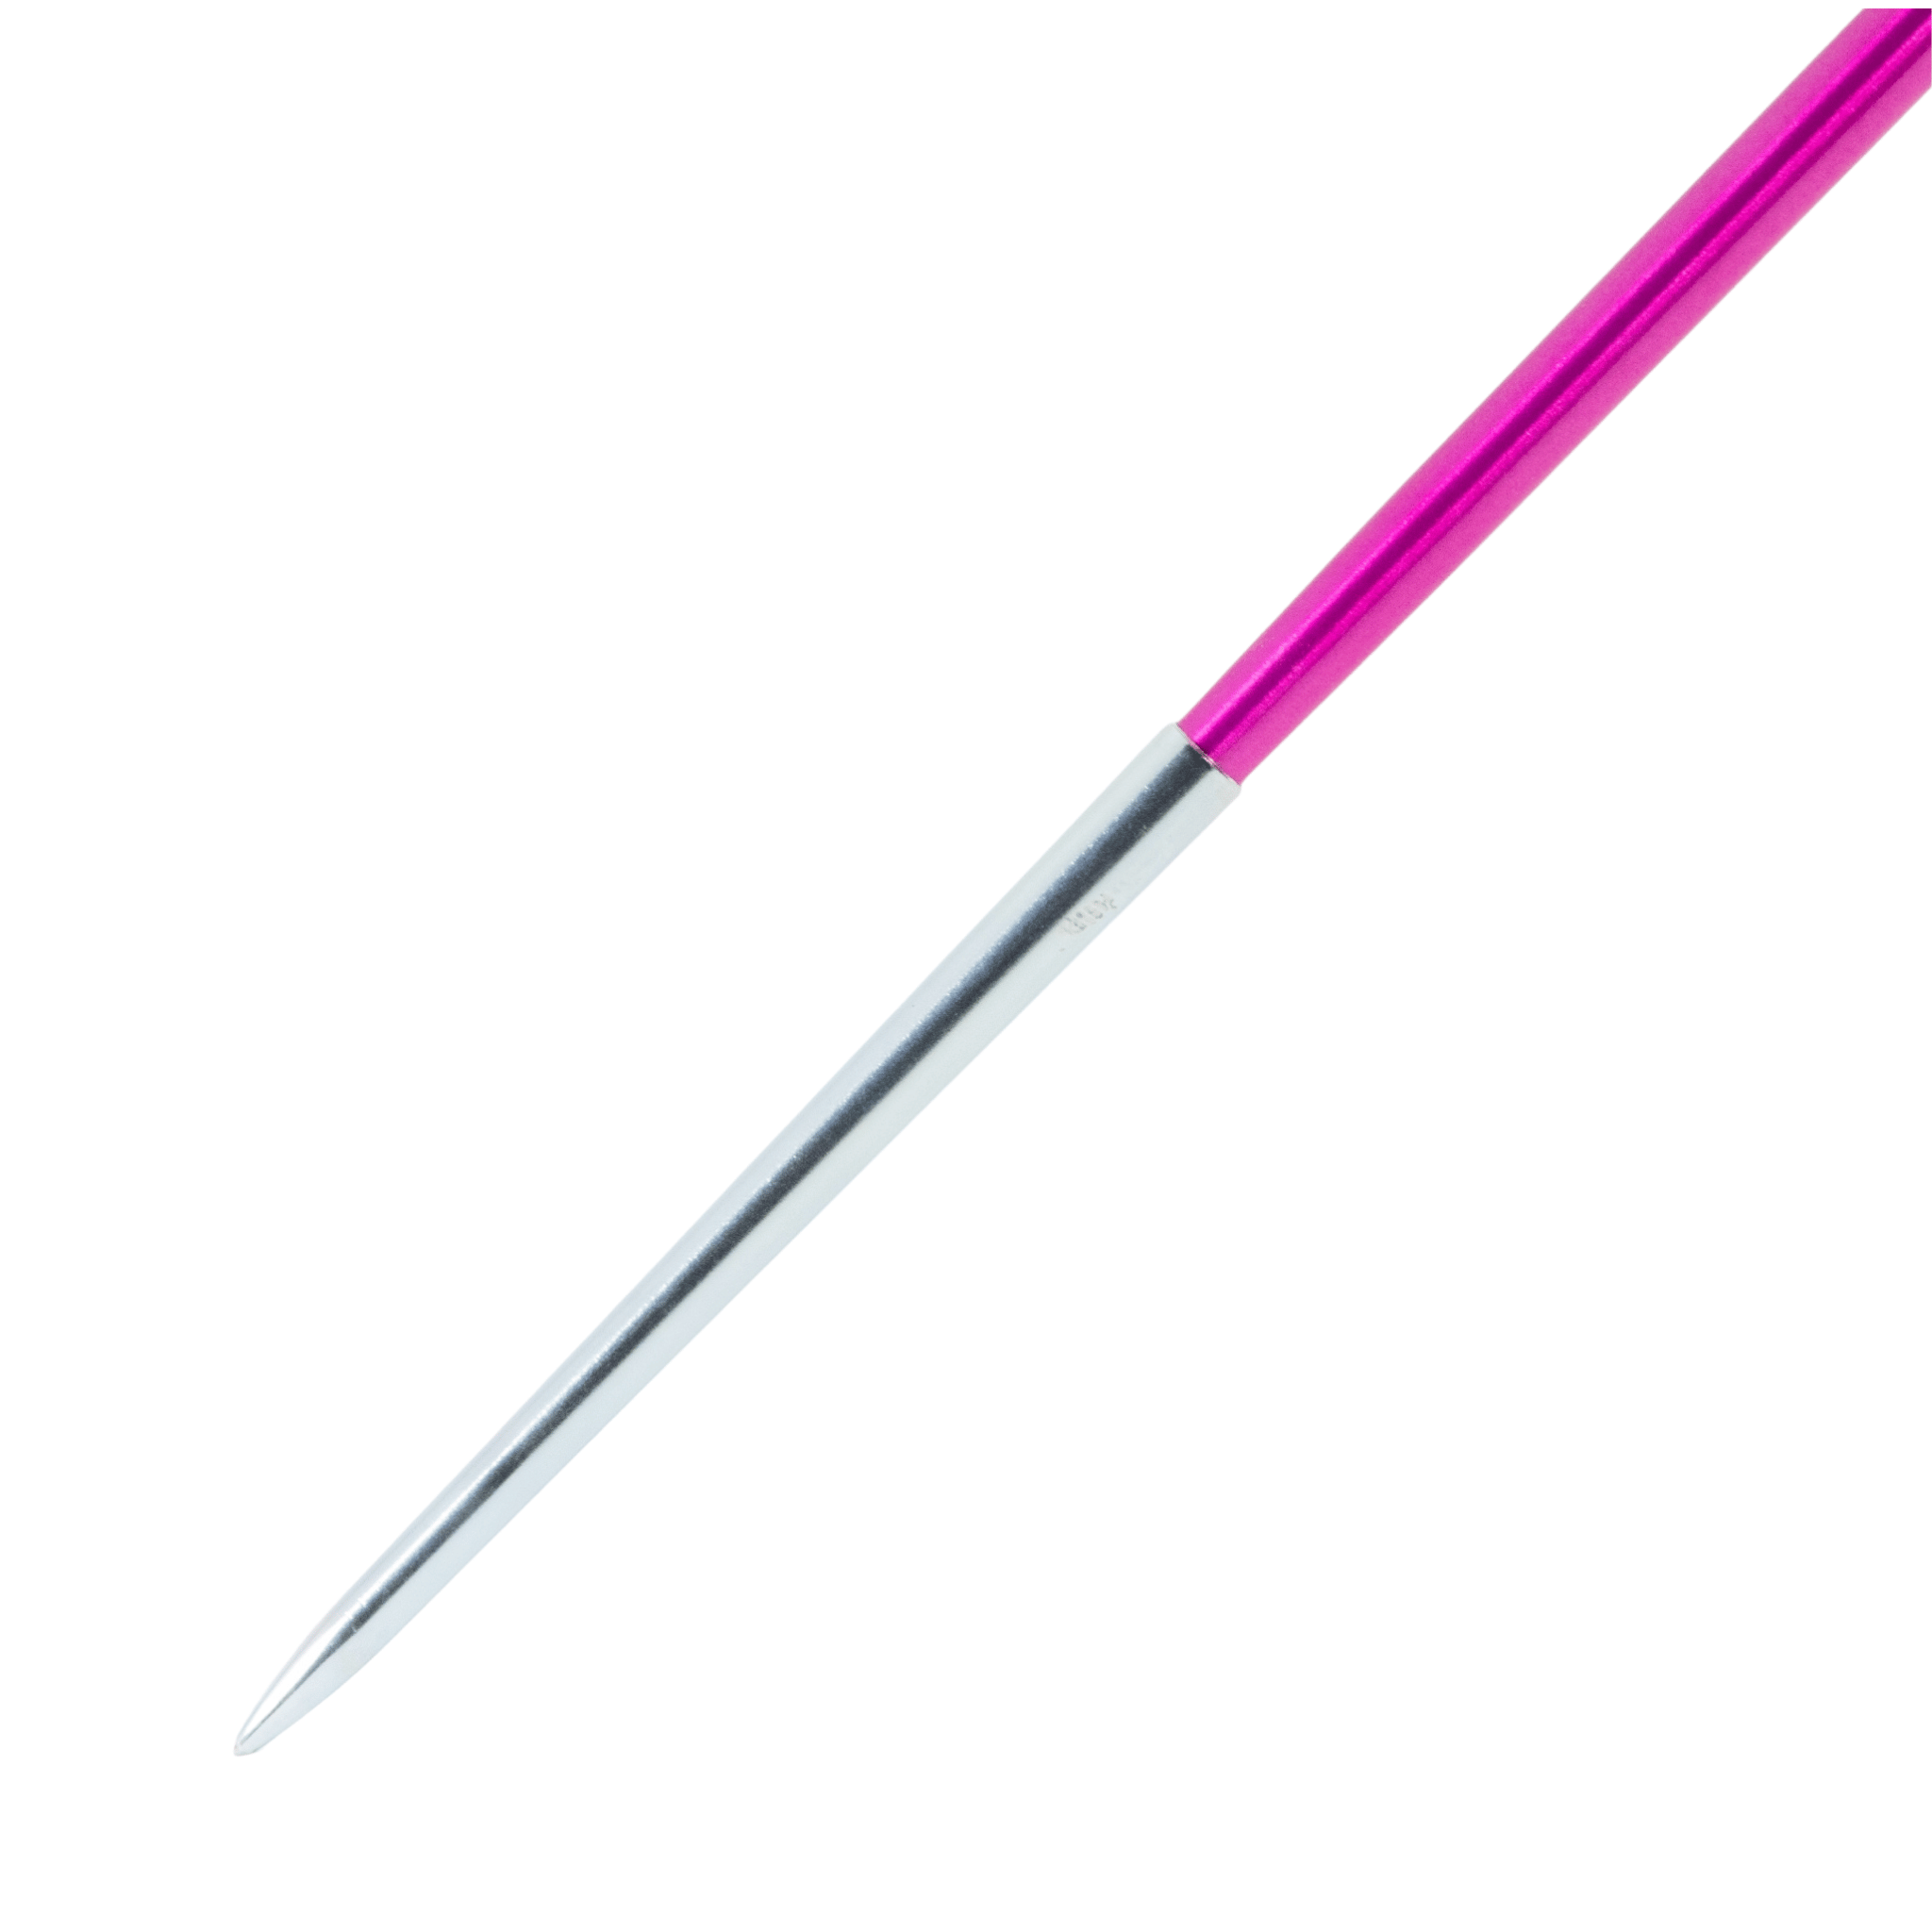 Polanik Airflyer Javelin tip view | Steel tip with pink body